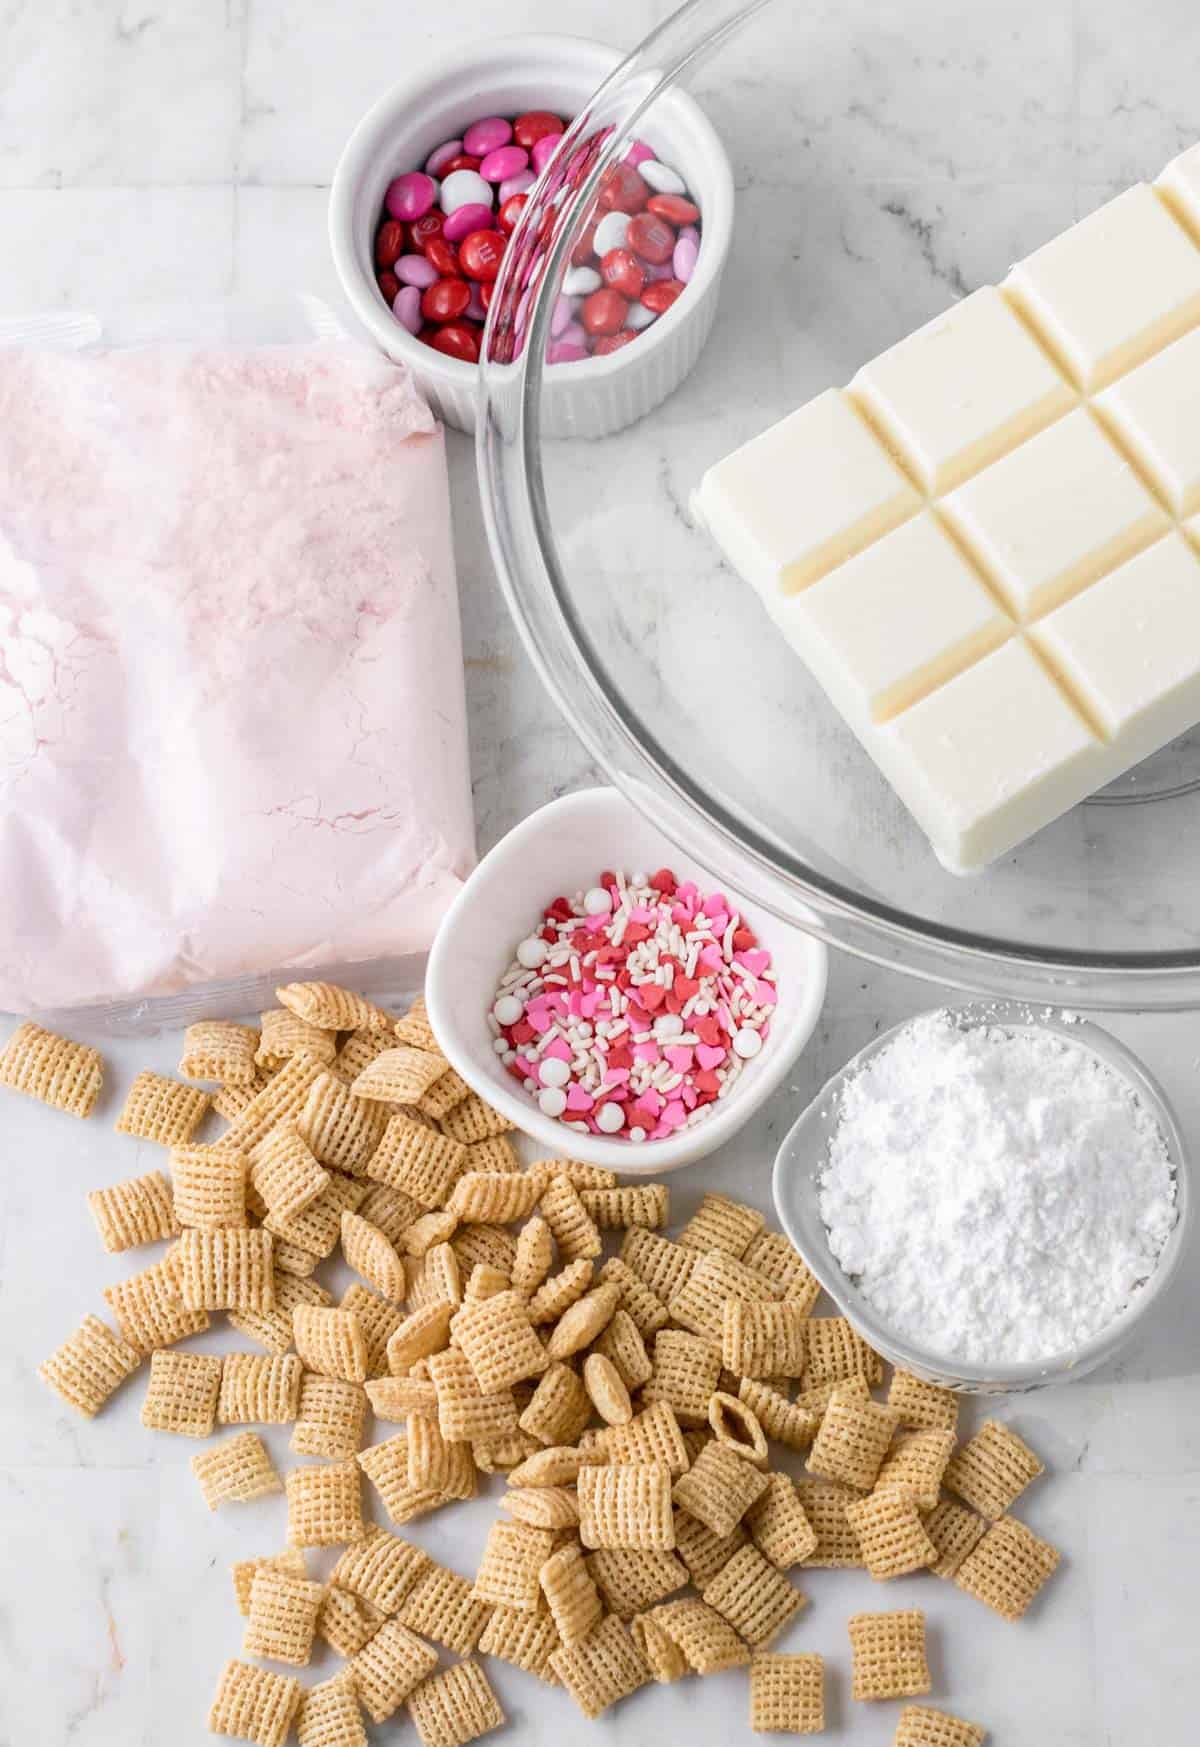 Ingredients for Valentine's day puppy chow in separate bowls including Rice Chex cereal, White almond bark, Strawberry cake mix, Powdered sugar, and Valentine’s Day Sprinkles
Valentine’s Day M&Ms